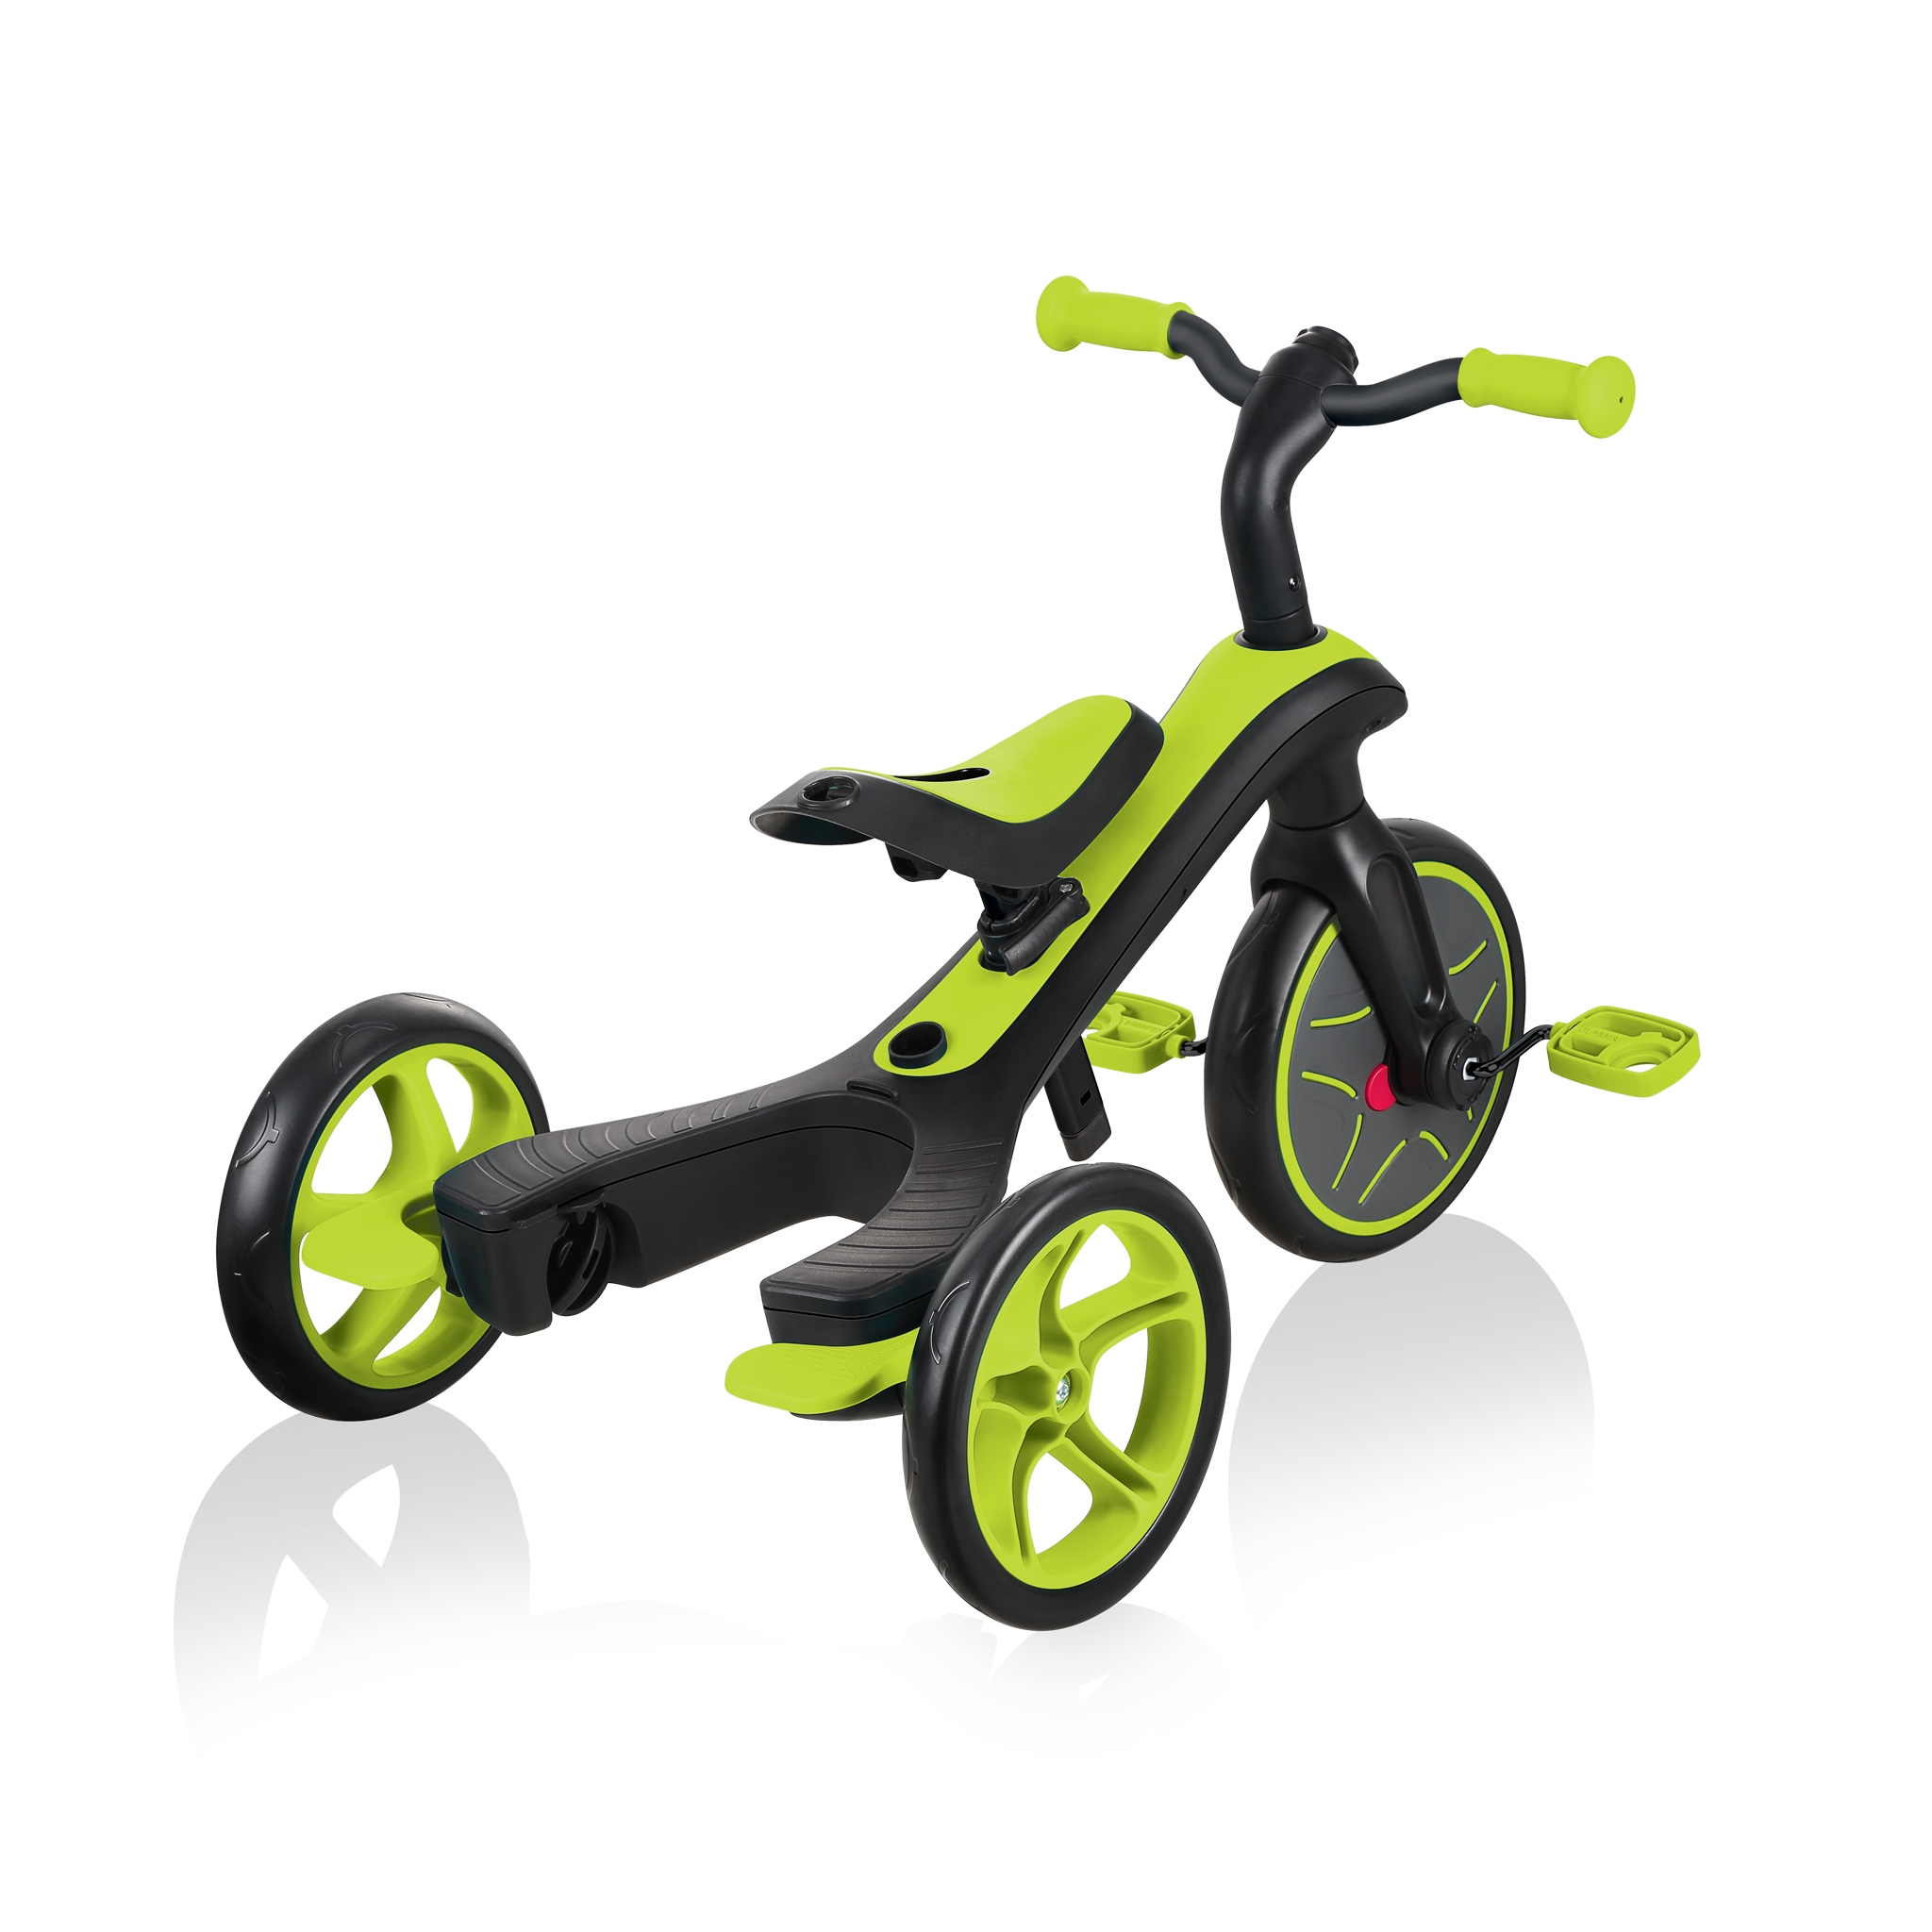 Globber-EXPLORER-TRIKE-3in1-all-in-one-baby-tricycle-and-kids-balance-bike-stage-2-training-trike_lime-green 5